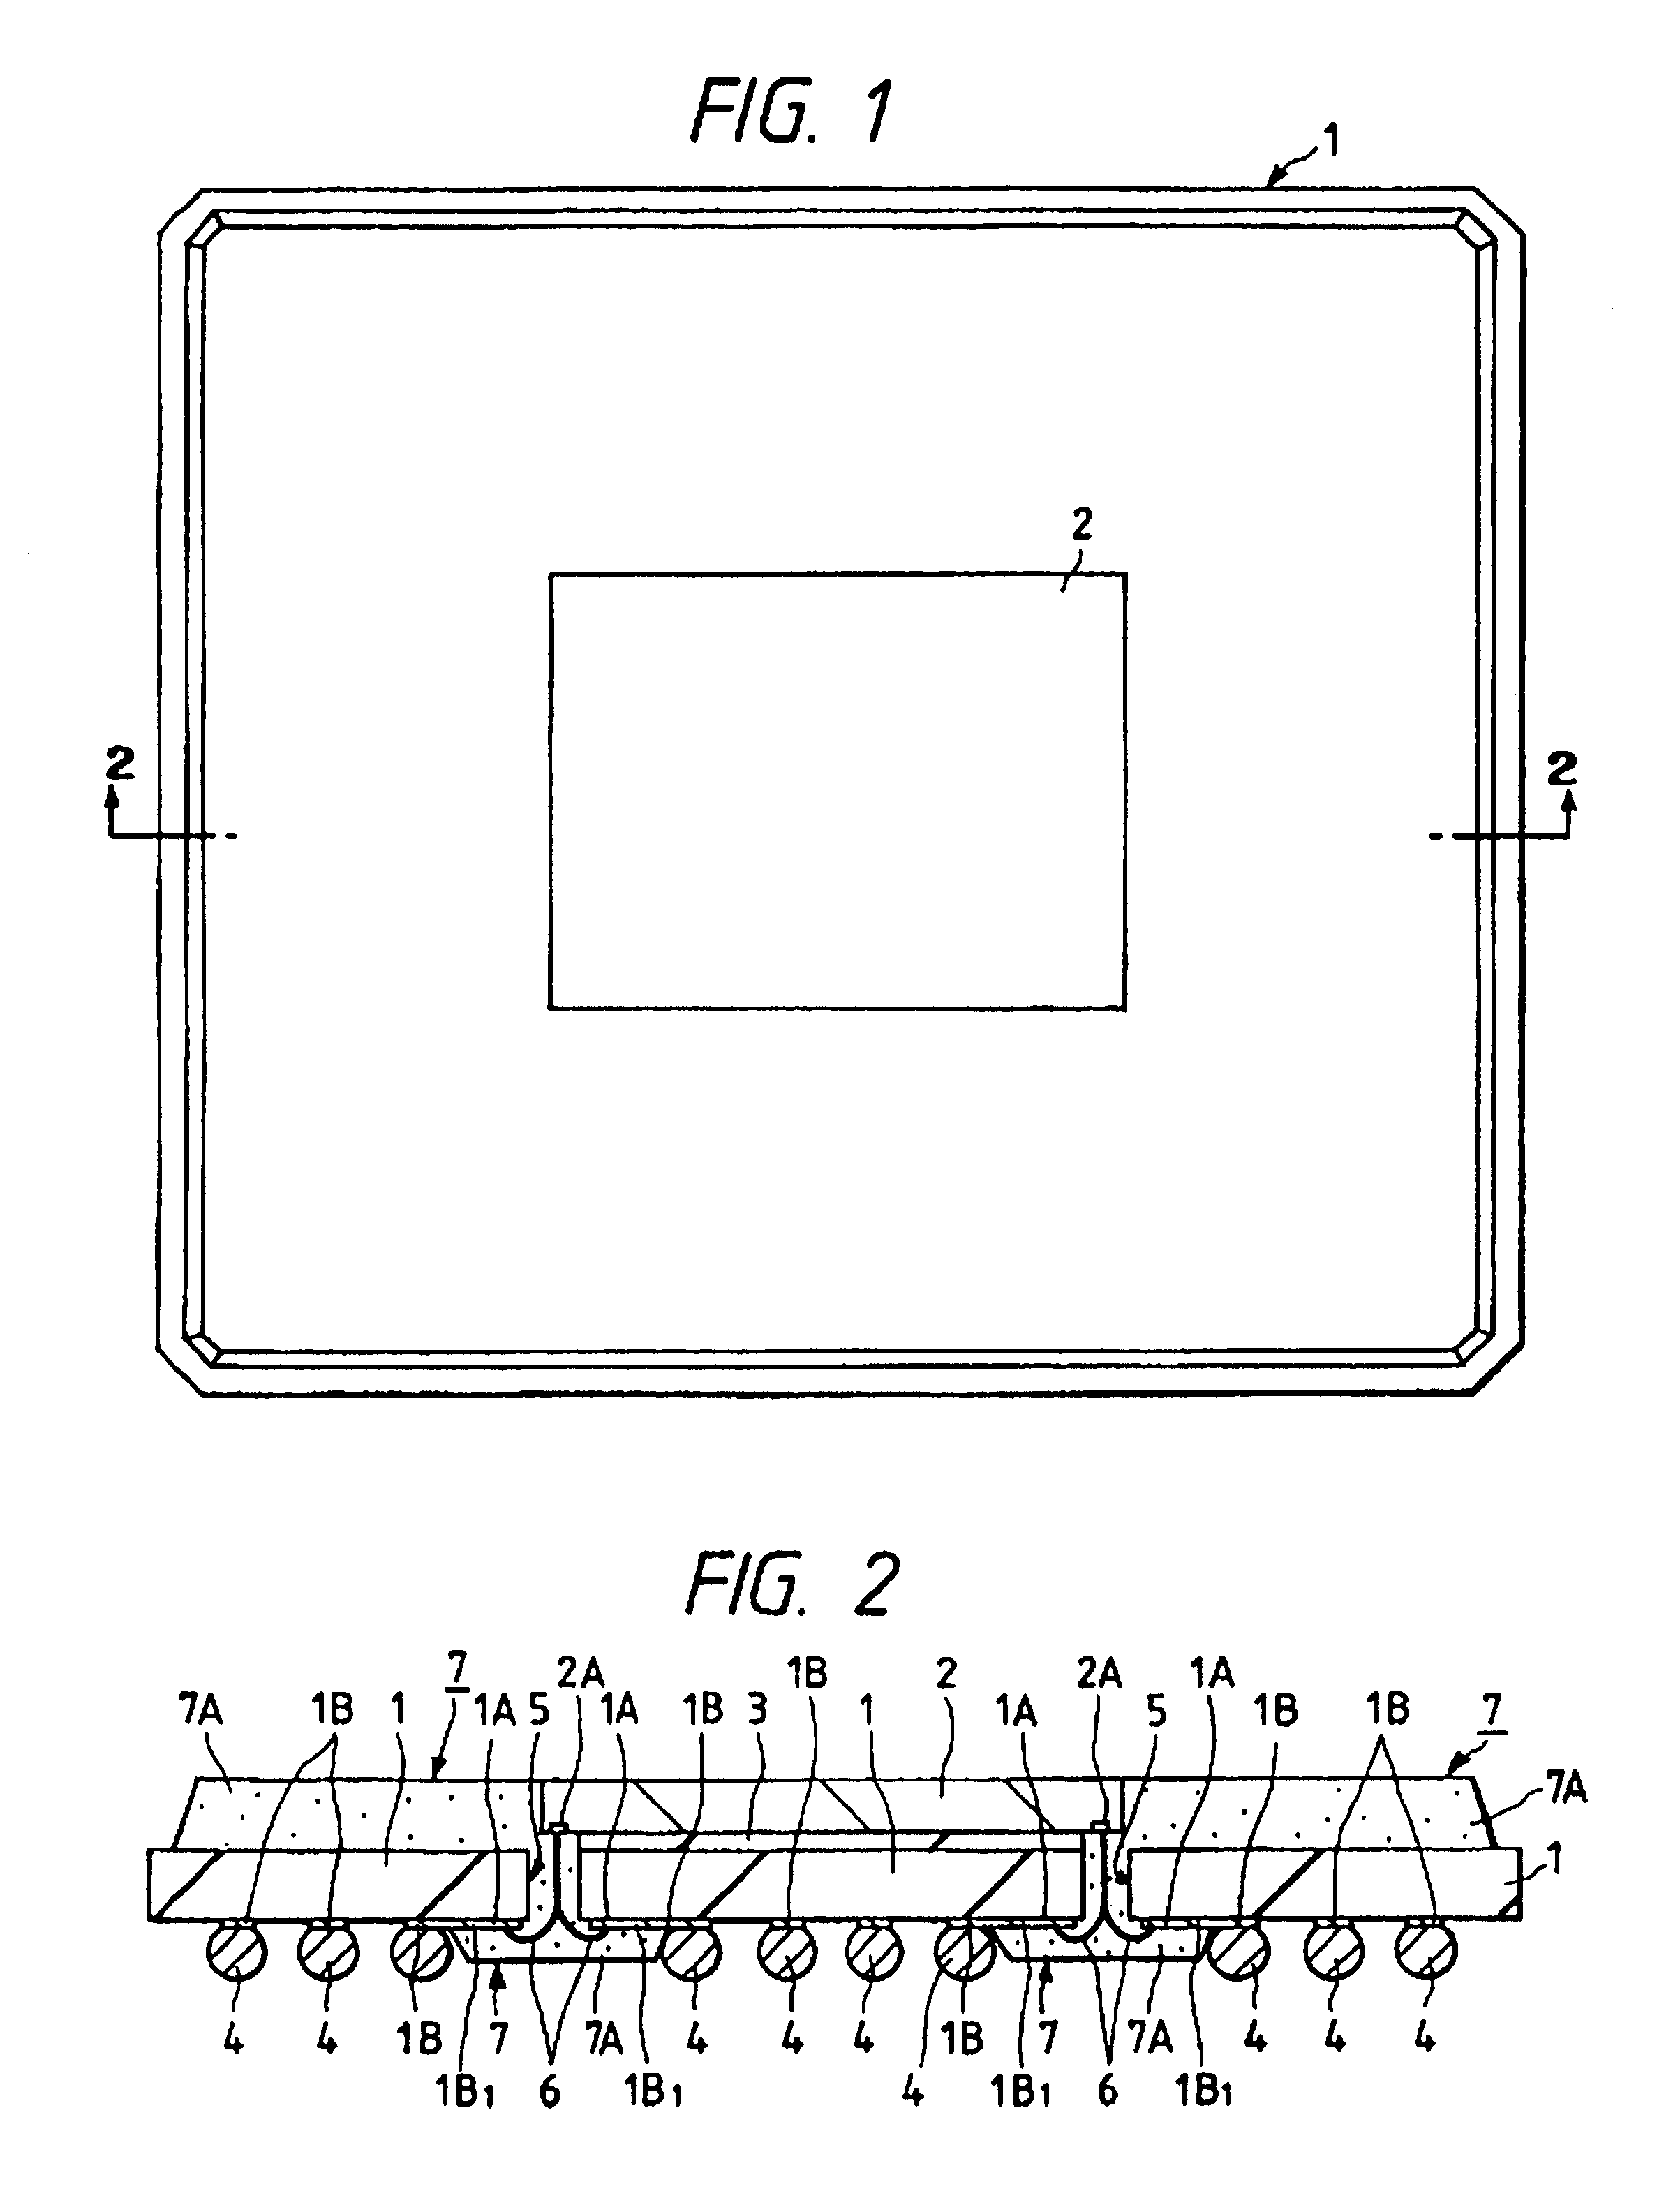 Semiconductor device having an improved connection arrangement between a semiconductor pellet and base substrate electrodes and a method of manufacture thereof